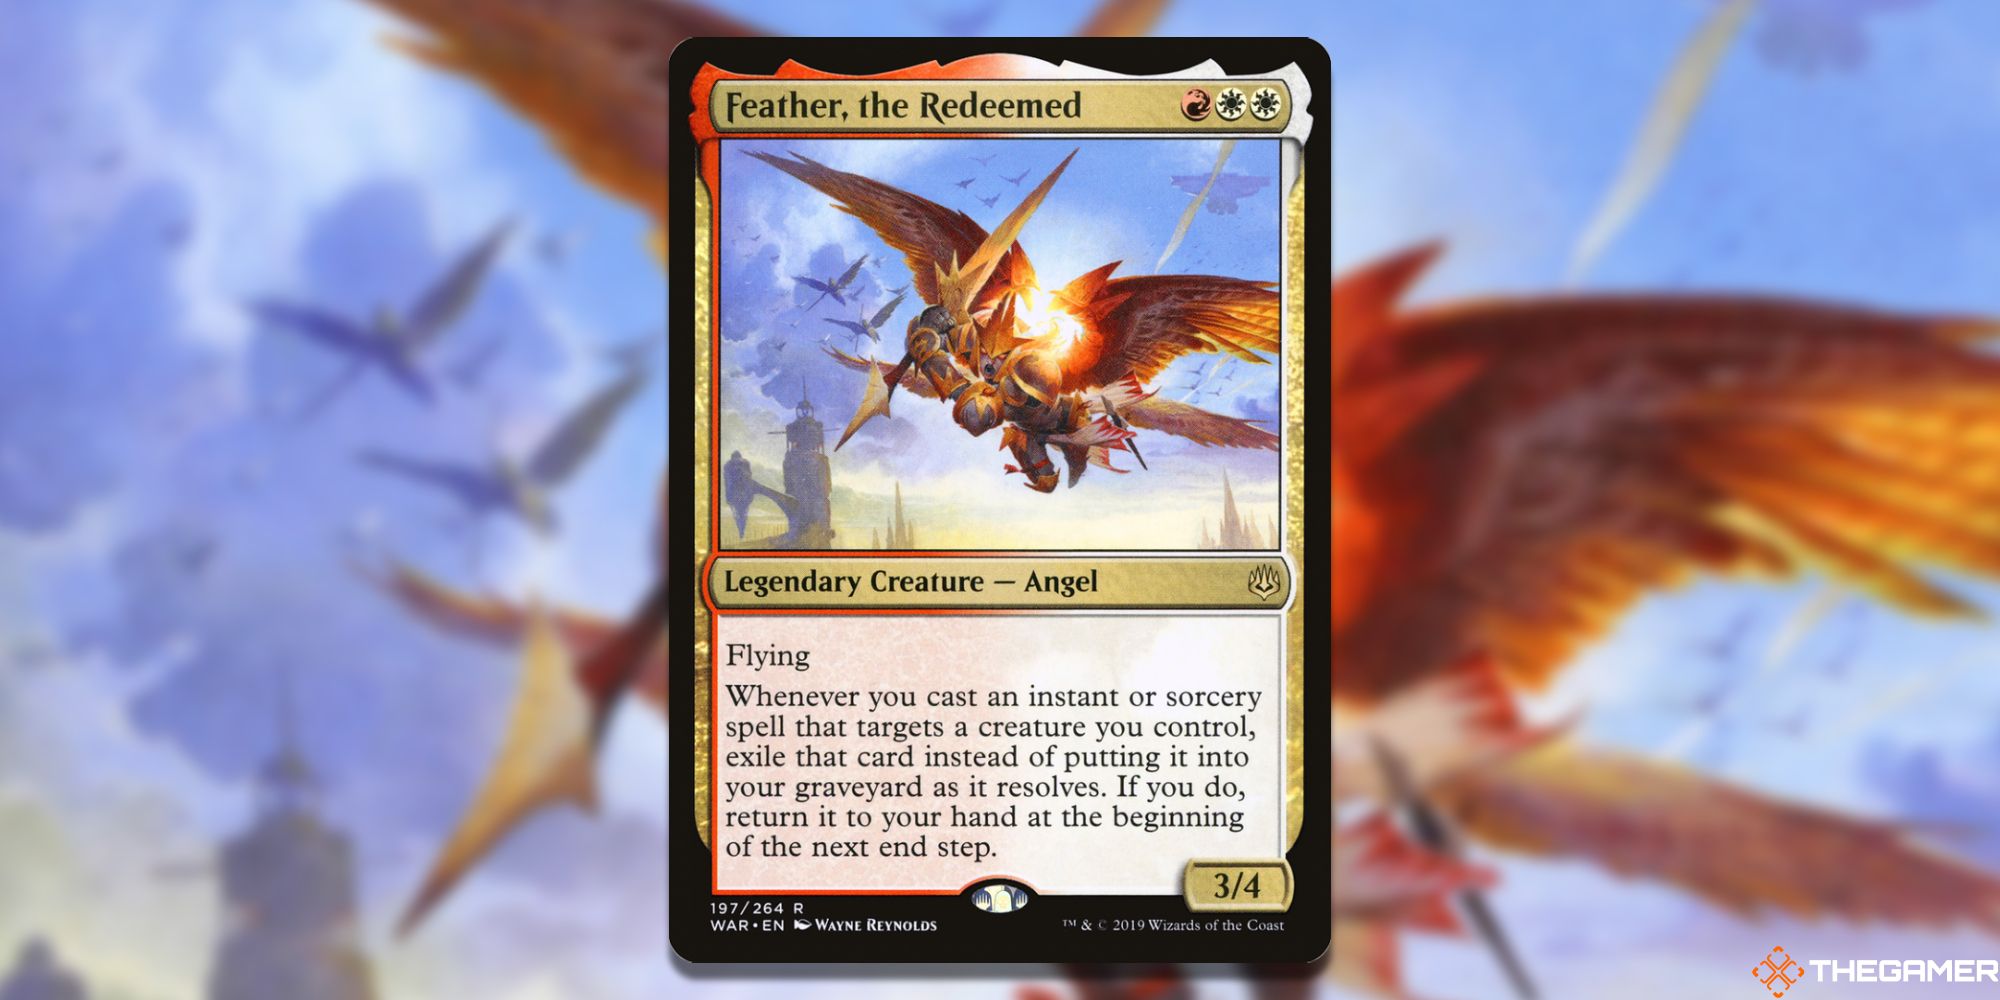 Image of the Feather, the Redeemed card in Magic: The Gathering, with art by Wayne Reynolds